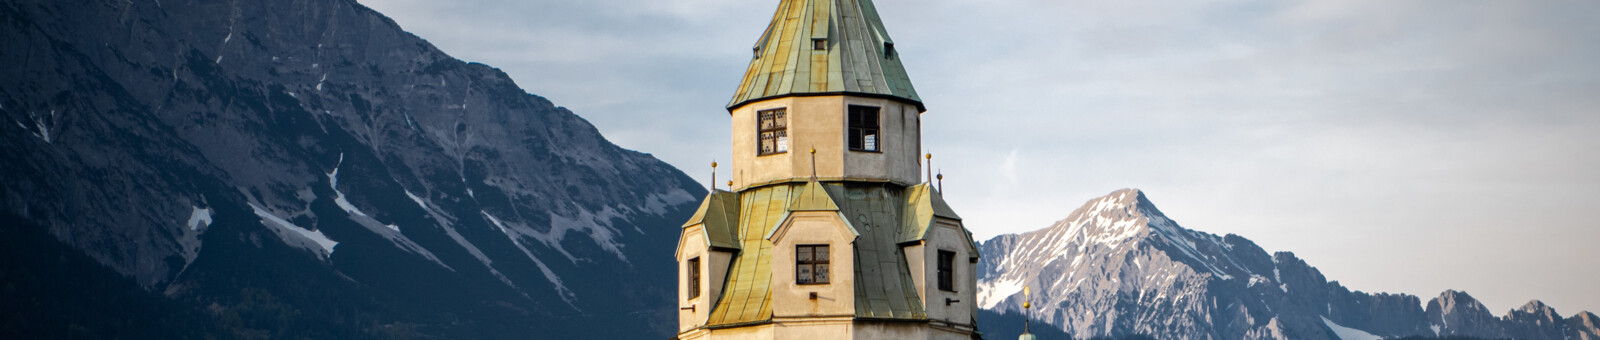     The landmark of the city of Hall in Tyrol: the Mint Tower Hall 